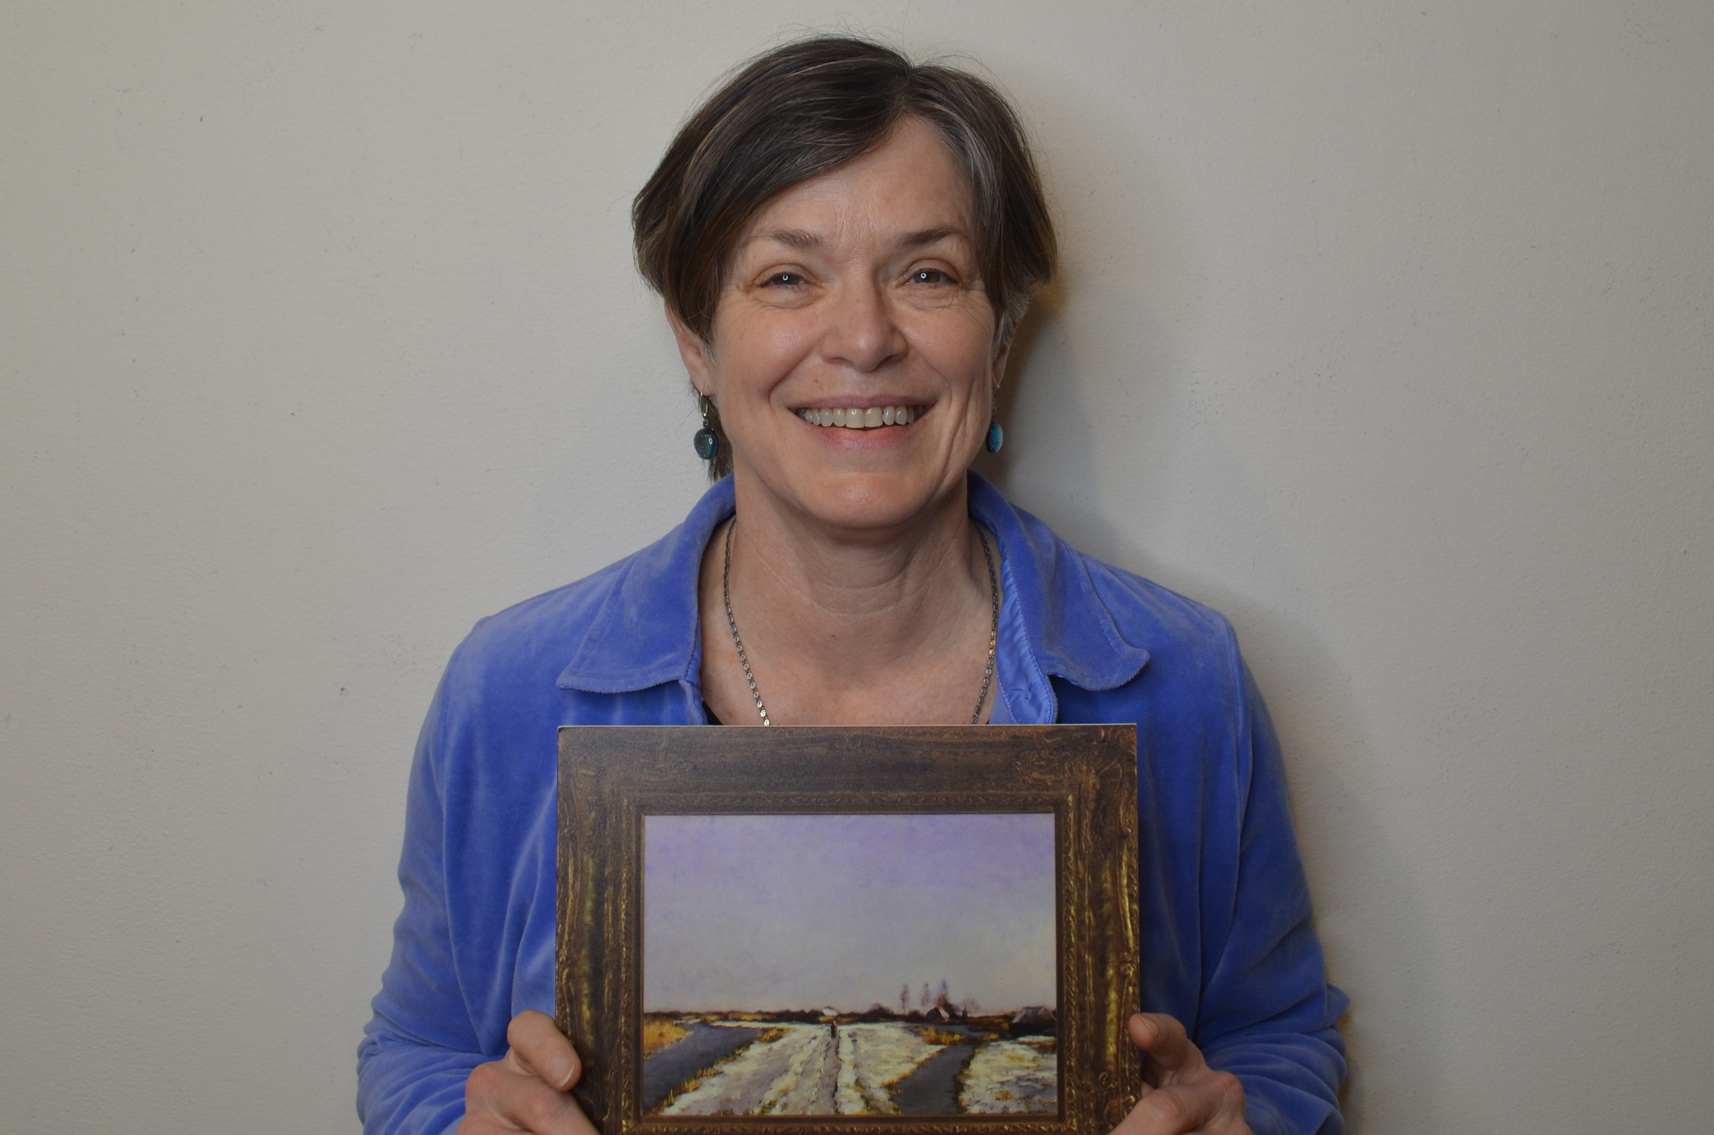 Photo of Cory Gooch, a woman with short hair, smiling and holding a small image of a painting